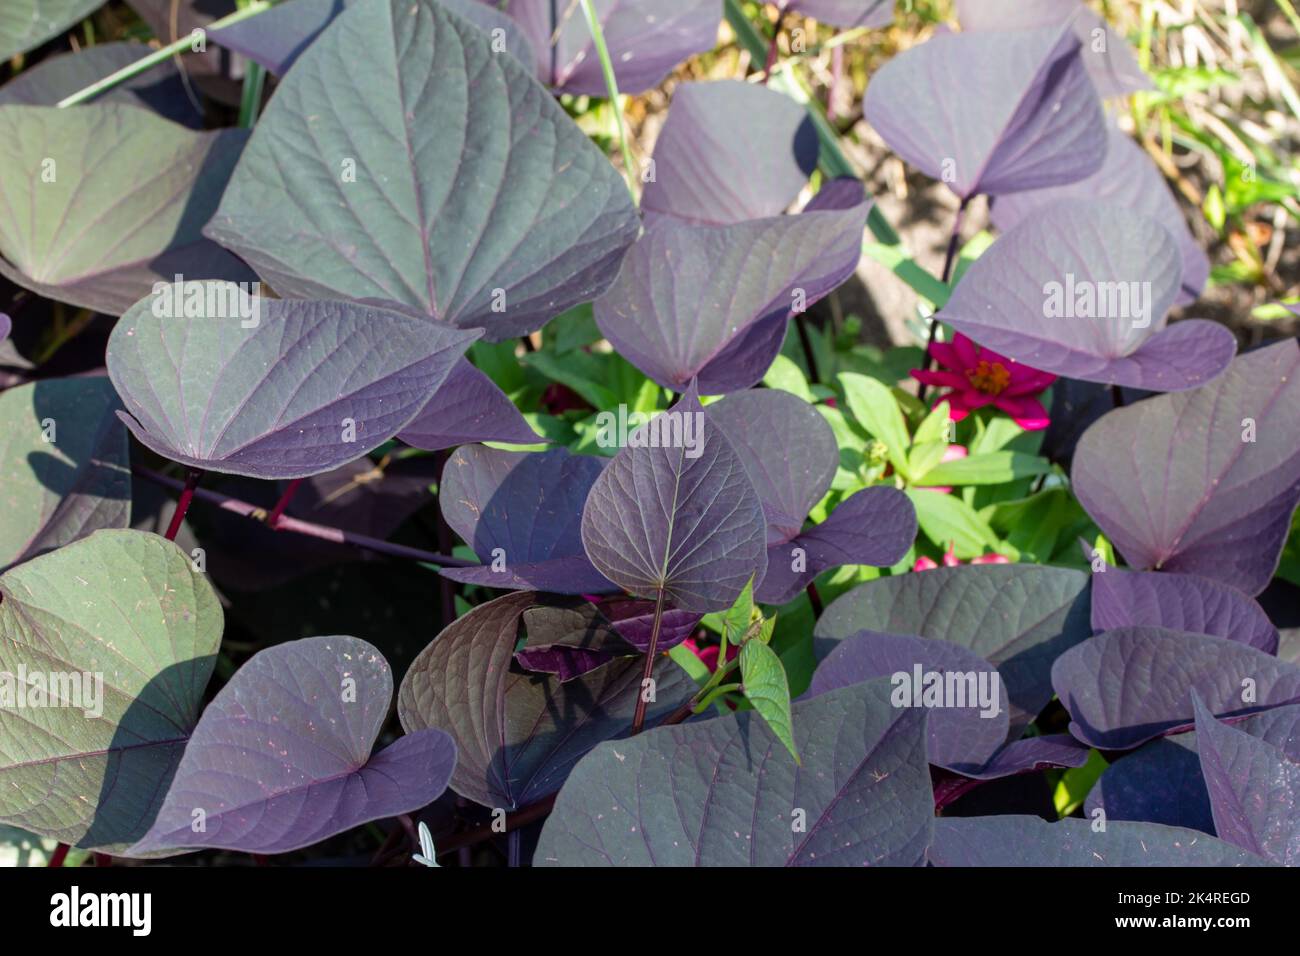 Full frame abstract texture background of a black heart ipomoea plant with dark purple leaves in a sunny butterfly garden Stock Photo